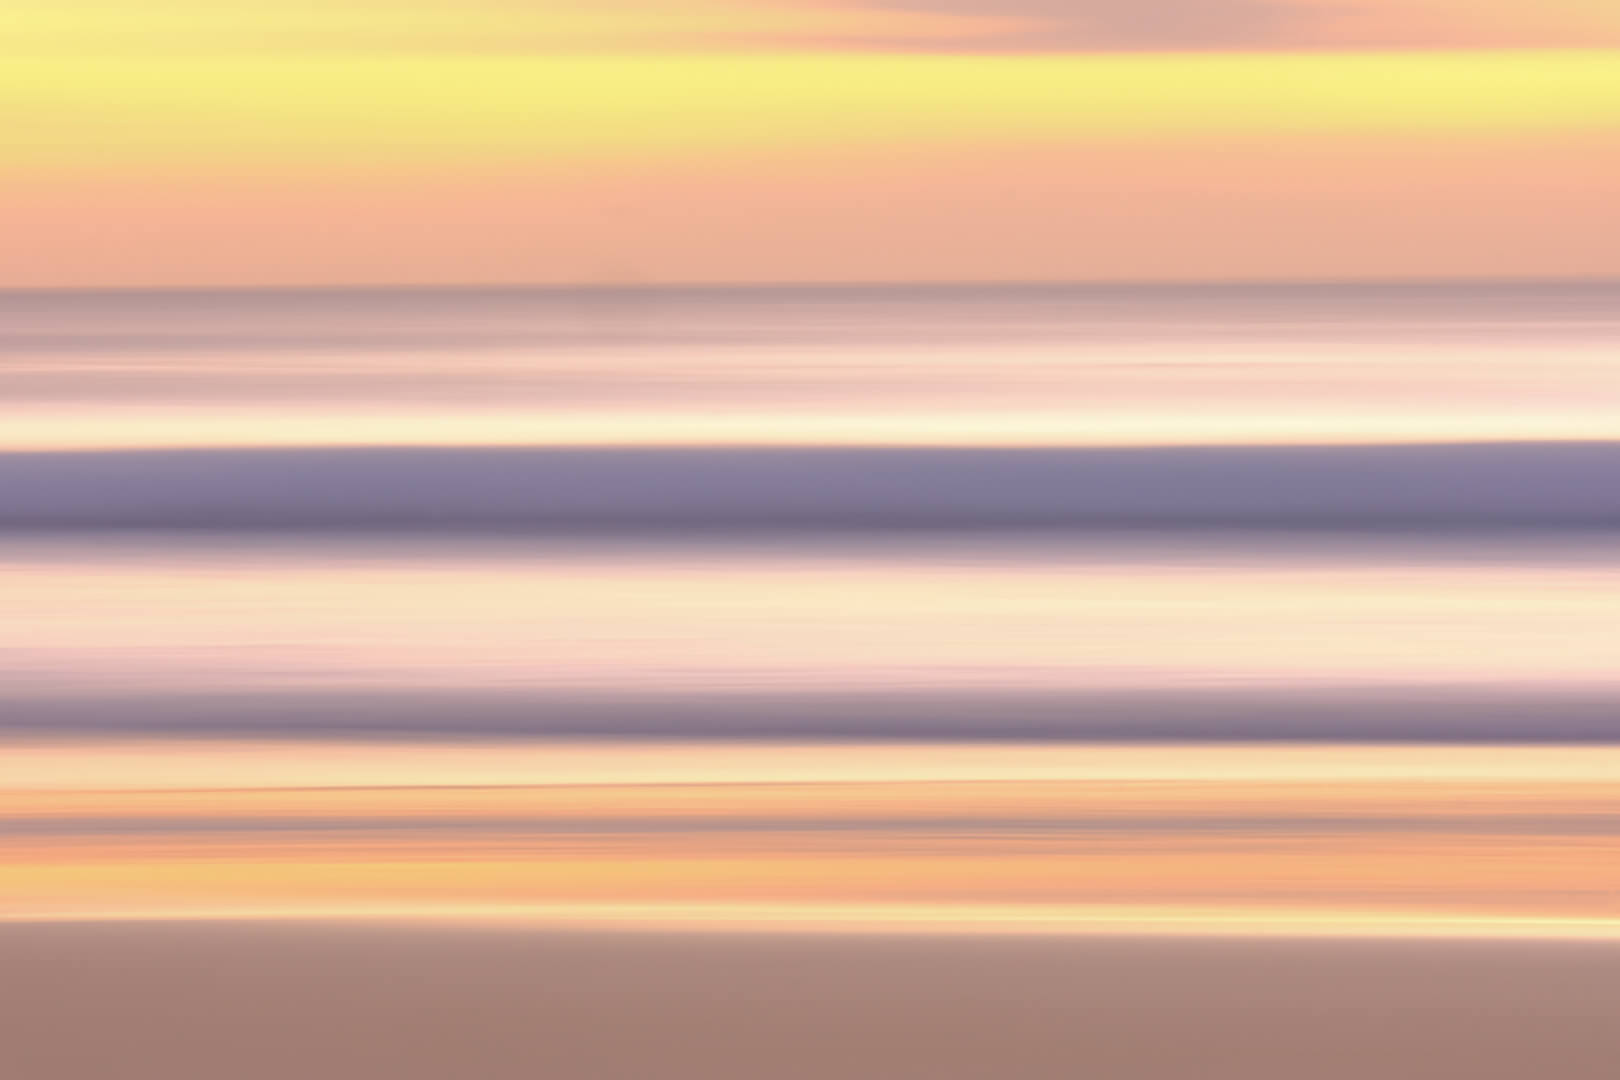 Honour For Digital Currumbin Morning  285 Colours ICM By Robert Vallance